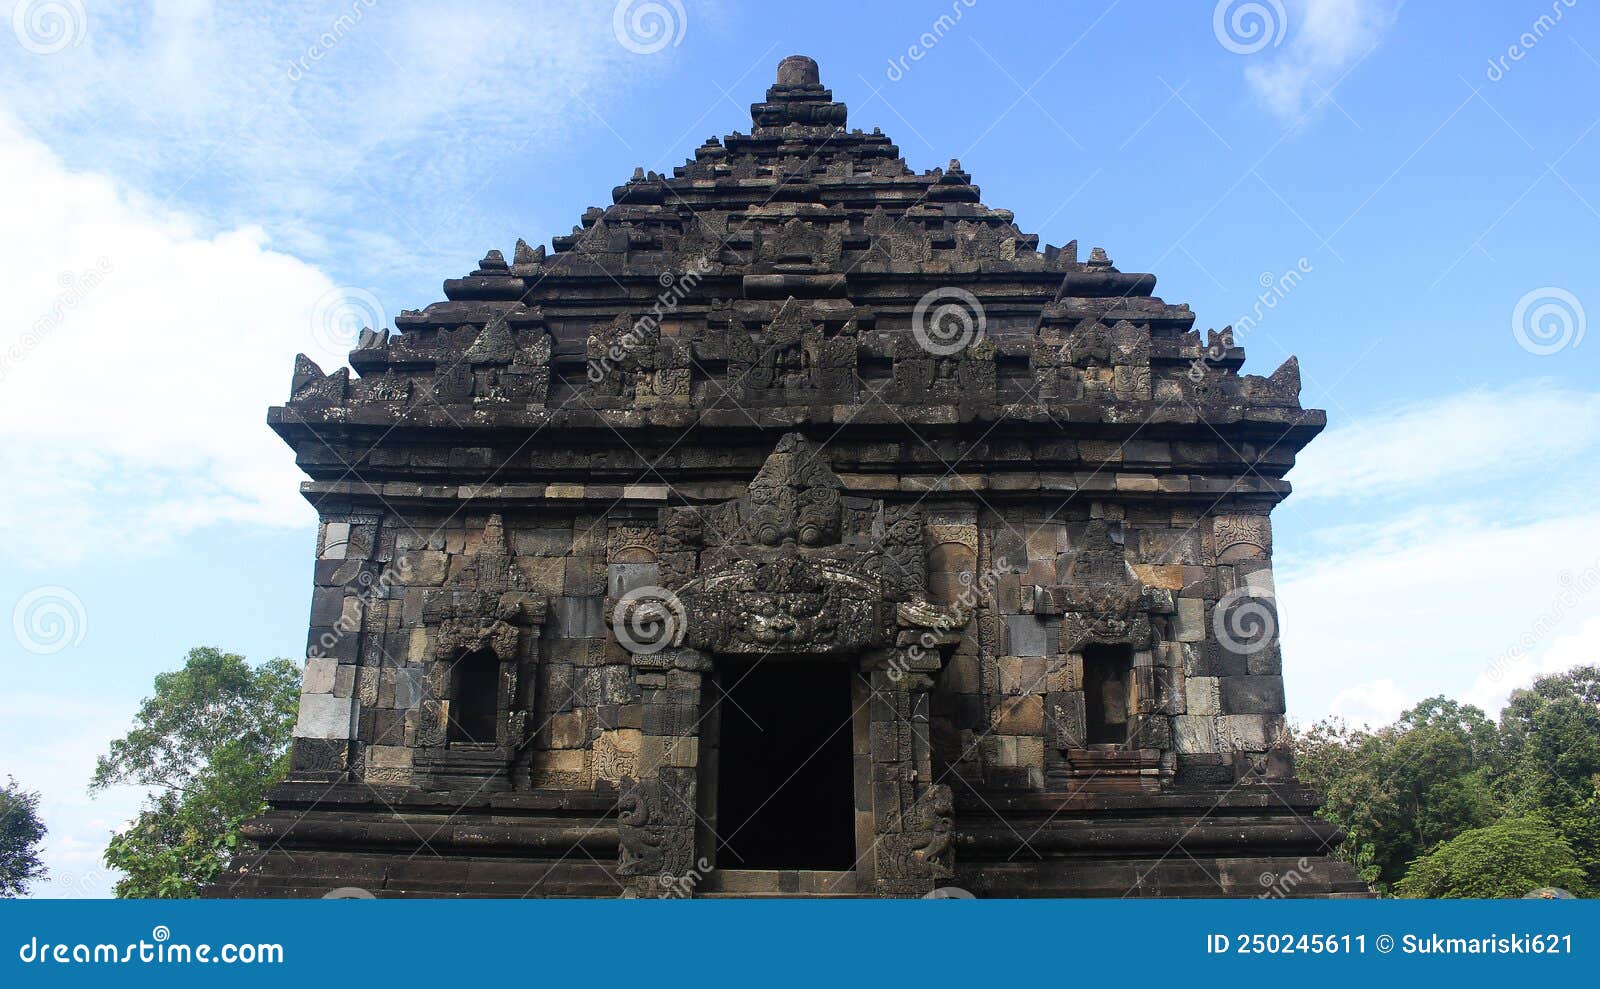 the exoticism of the architecture of the ijo temple in yogyakarta